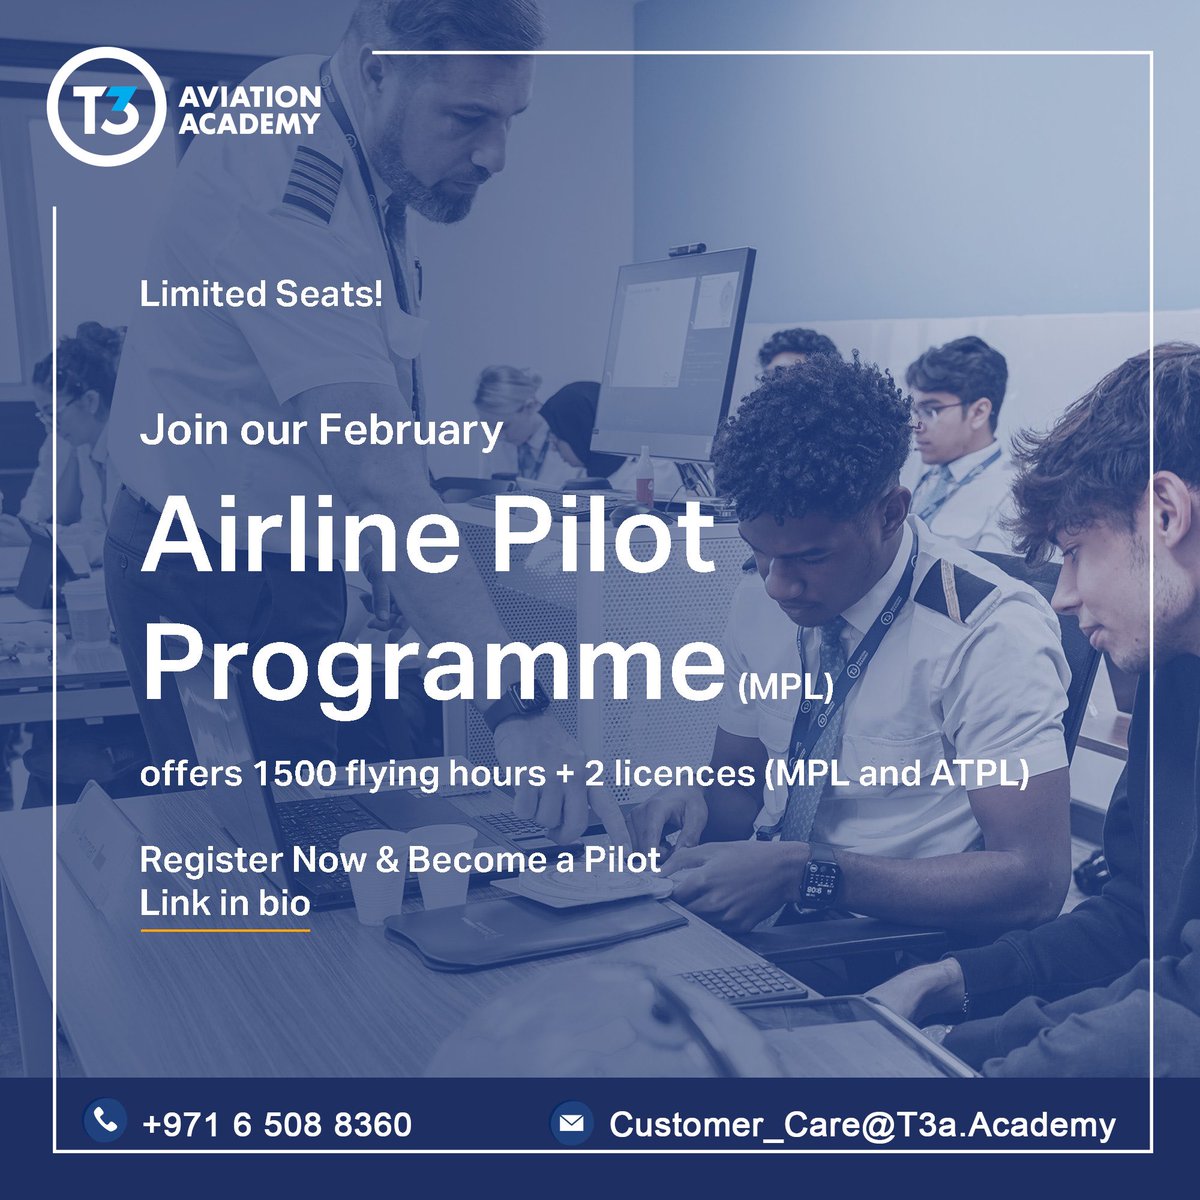 For the application details and requirements, don't hesitate to send us a message or visit t3a.academy.

#LineTraining #BaseTraining #GroundSchool #CoreFlying #flighttraining #ATPL #Airbus #A320 #Cadet #typerating #cabincrew #AirbusA320 #Romania #armenia